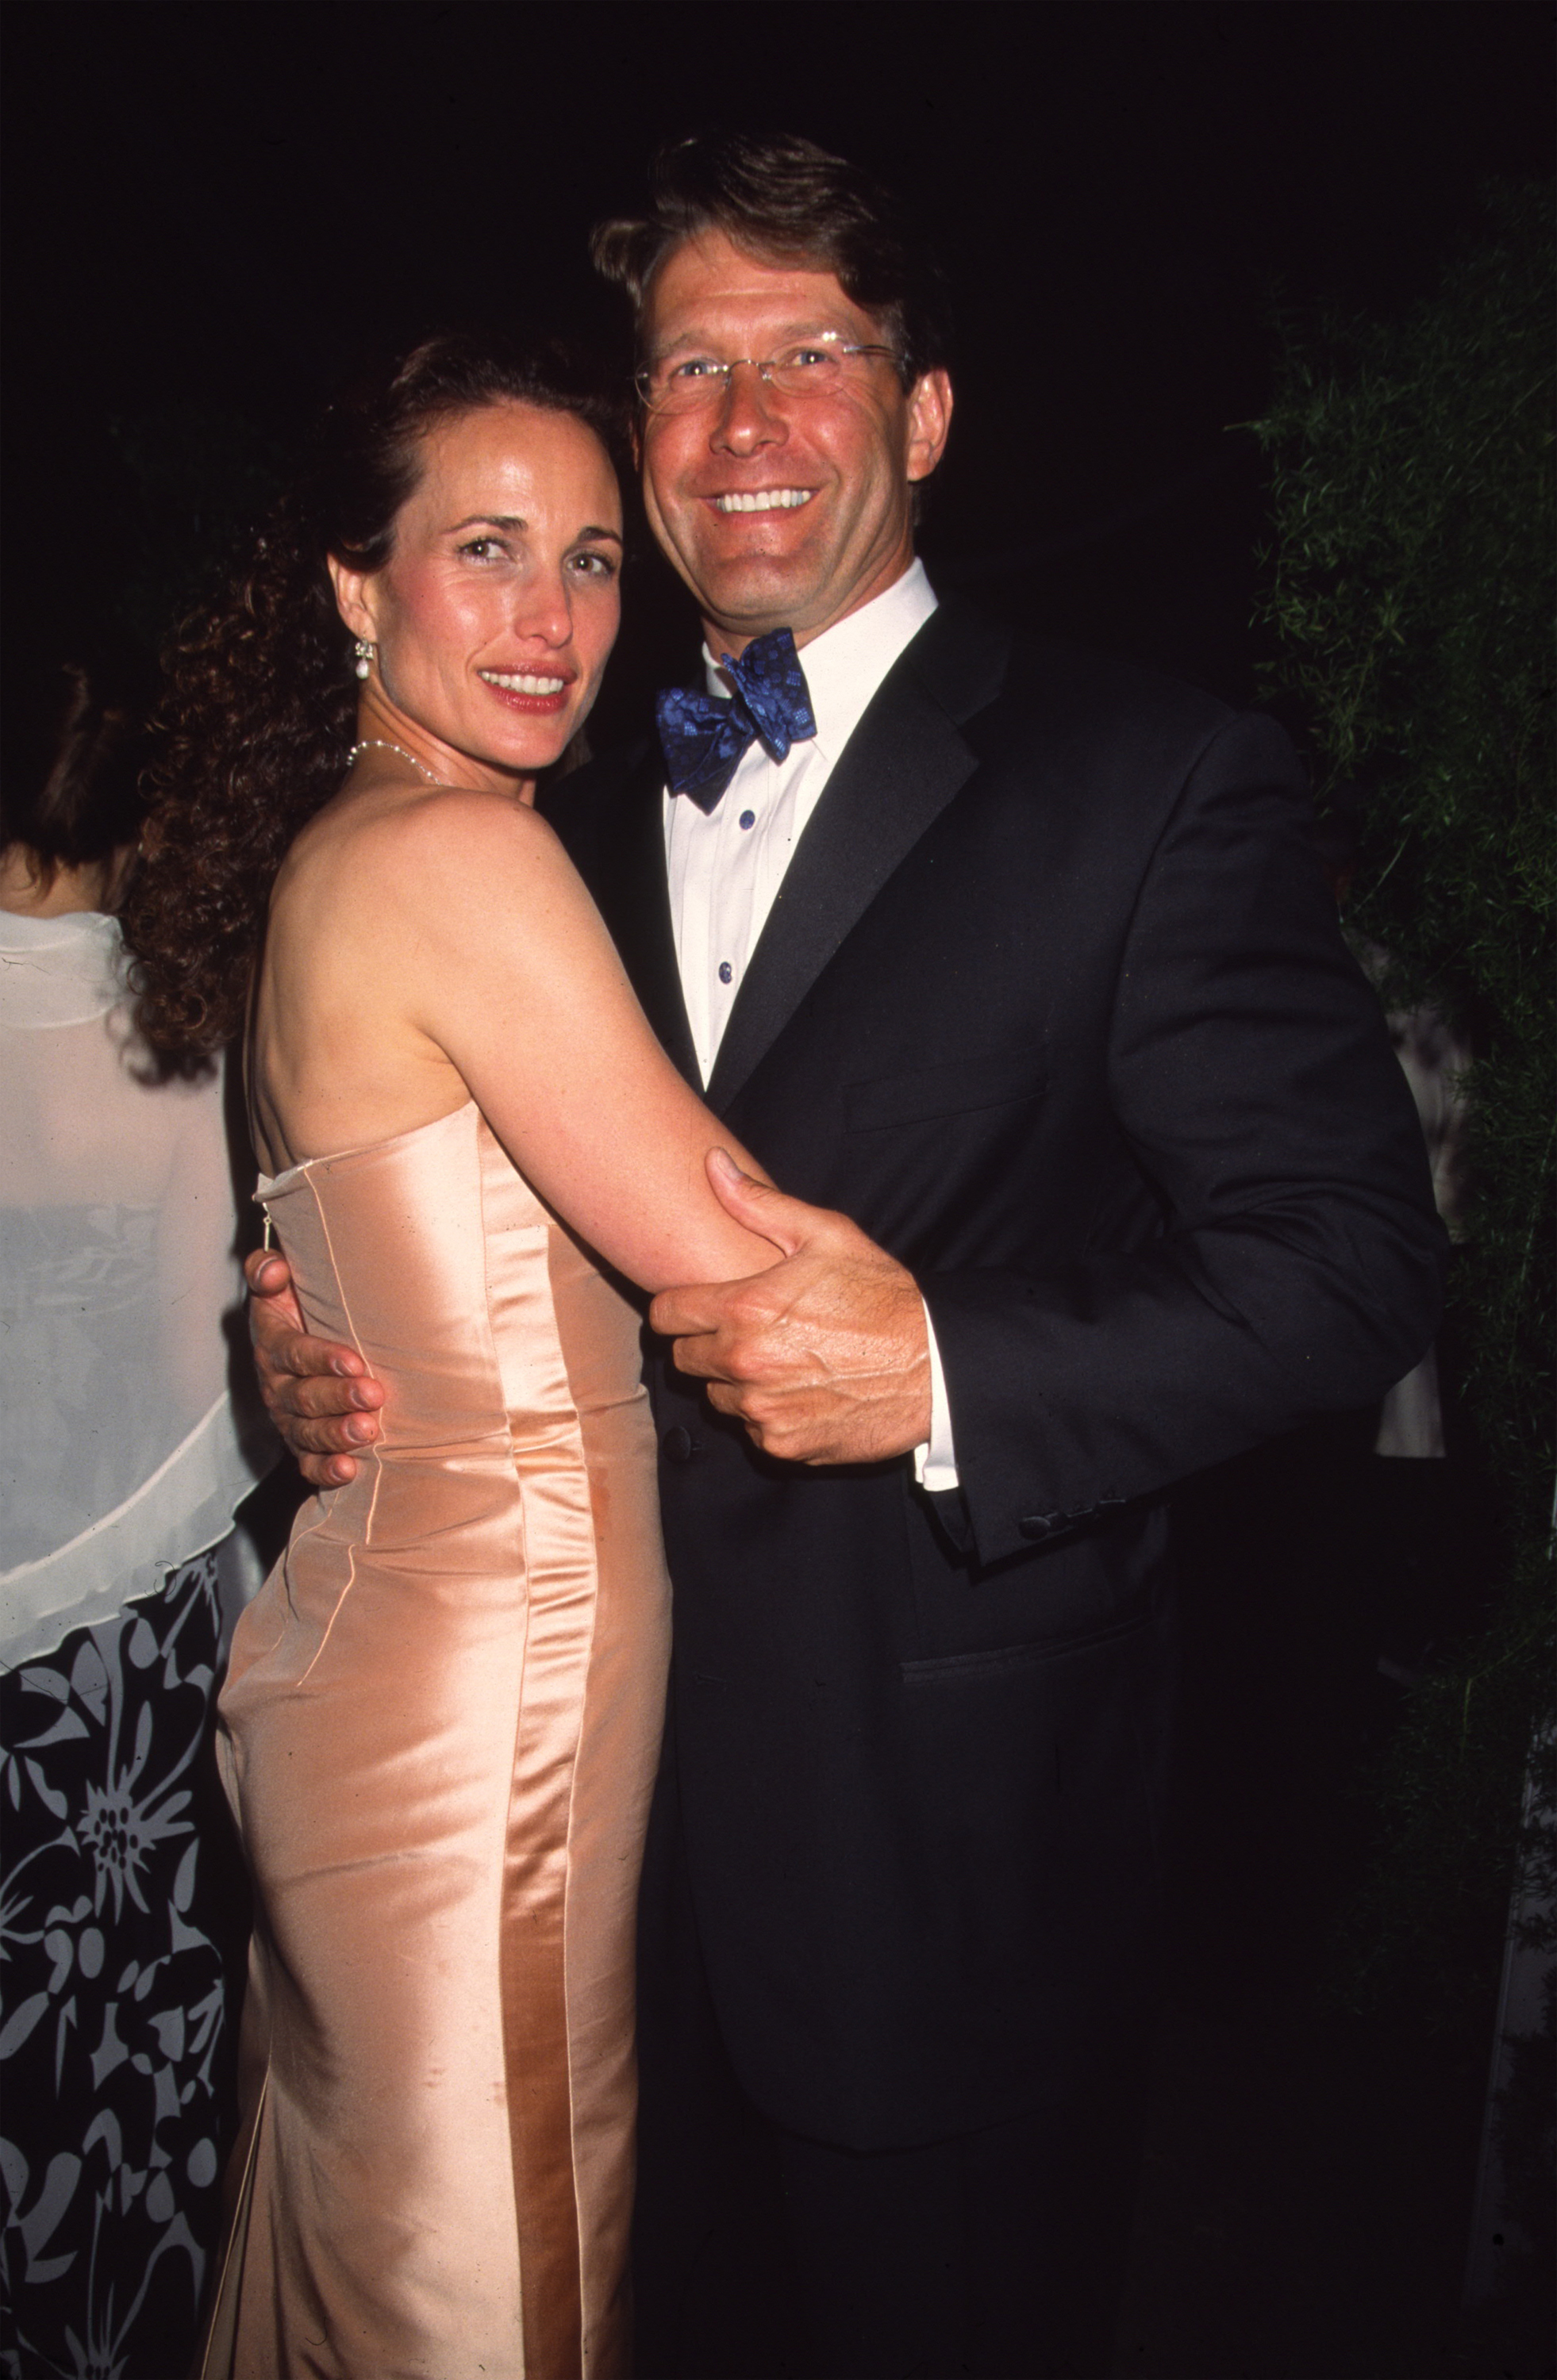 Andie MacDowell and Rhett Hartzog at the Spoleto Festival on January 1, 2001, in Charleston, South Carolina. | Source: Getty Images